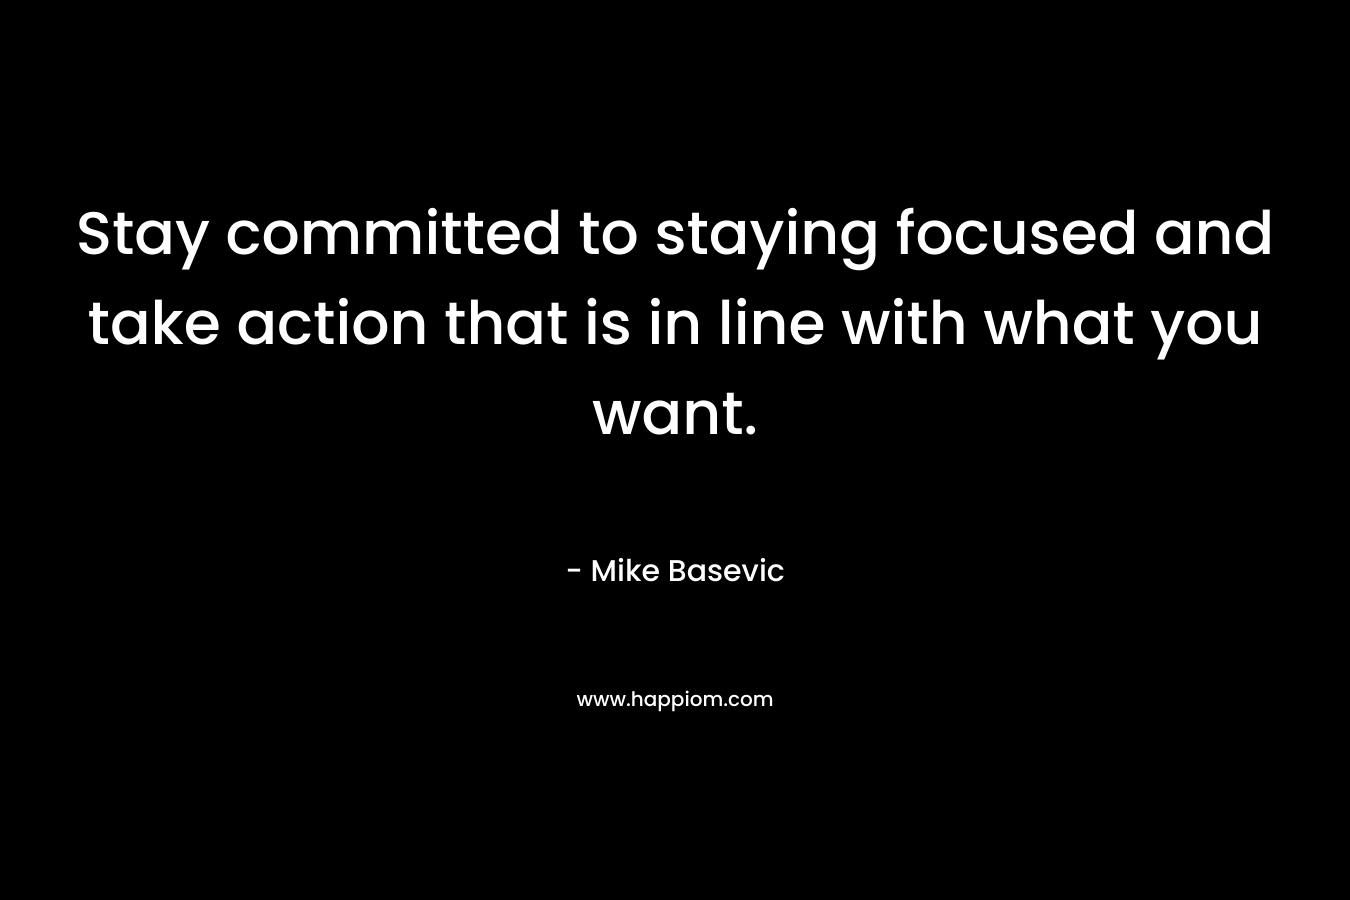 Stay committed to staying focused and take action that is in line with what you want.